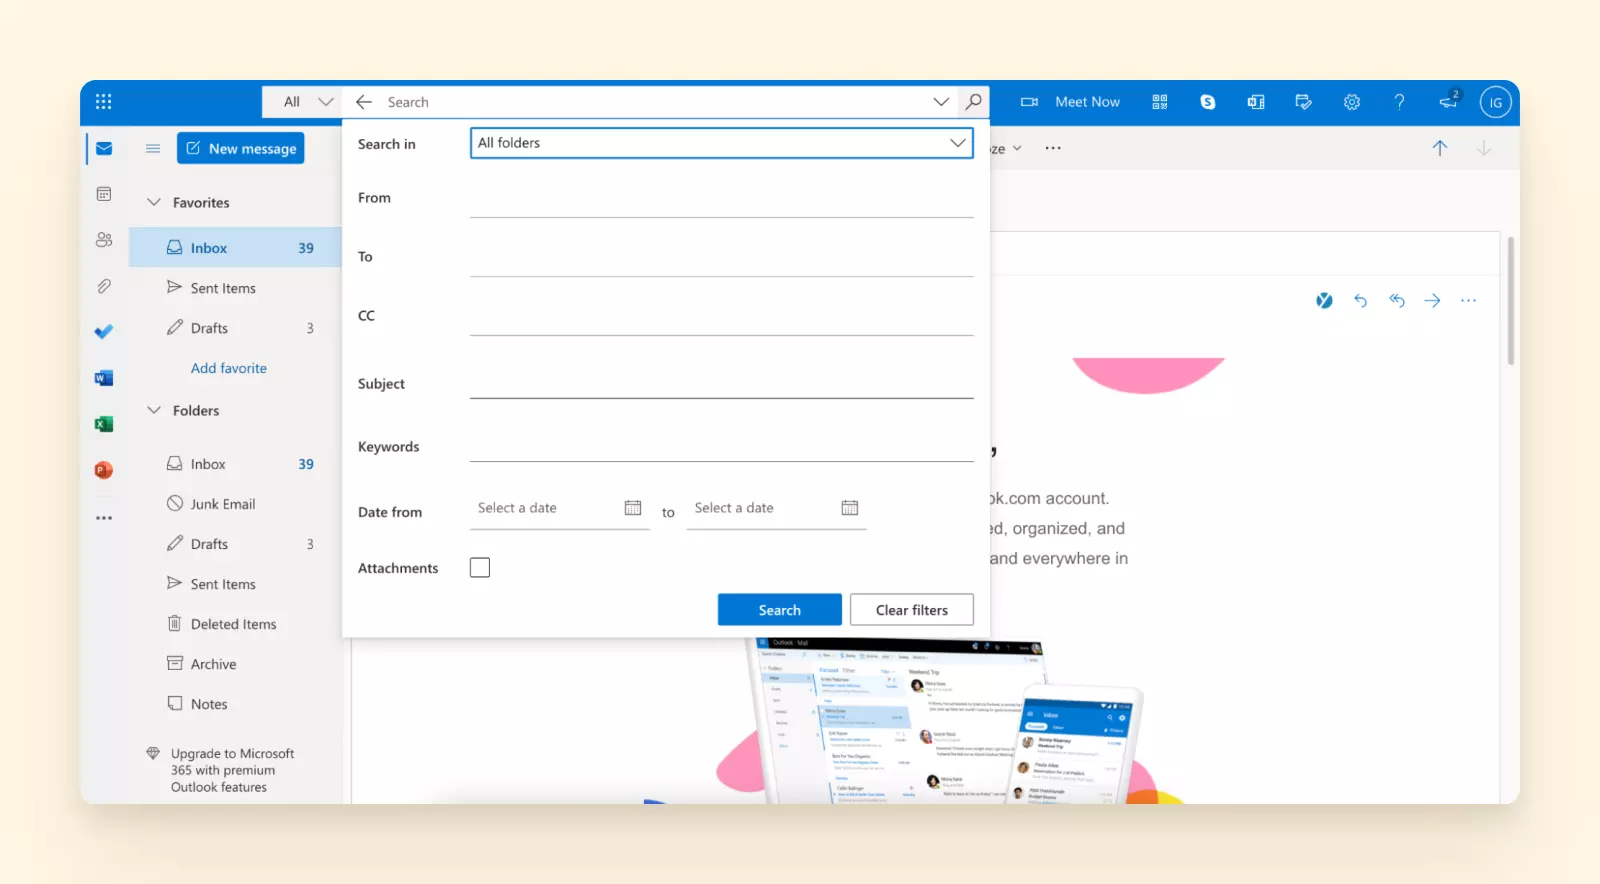 Search and filter options in Outlook webmail